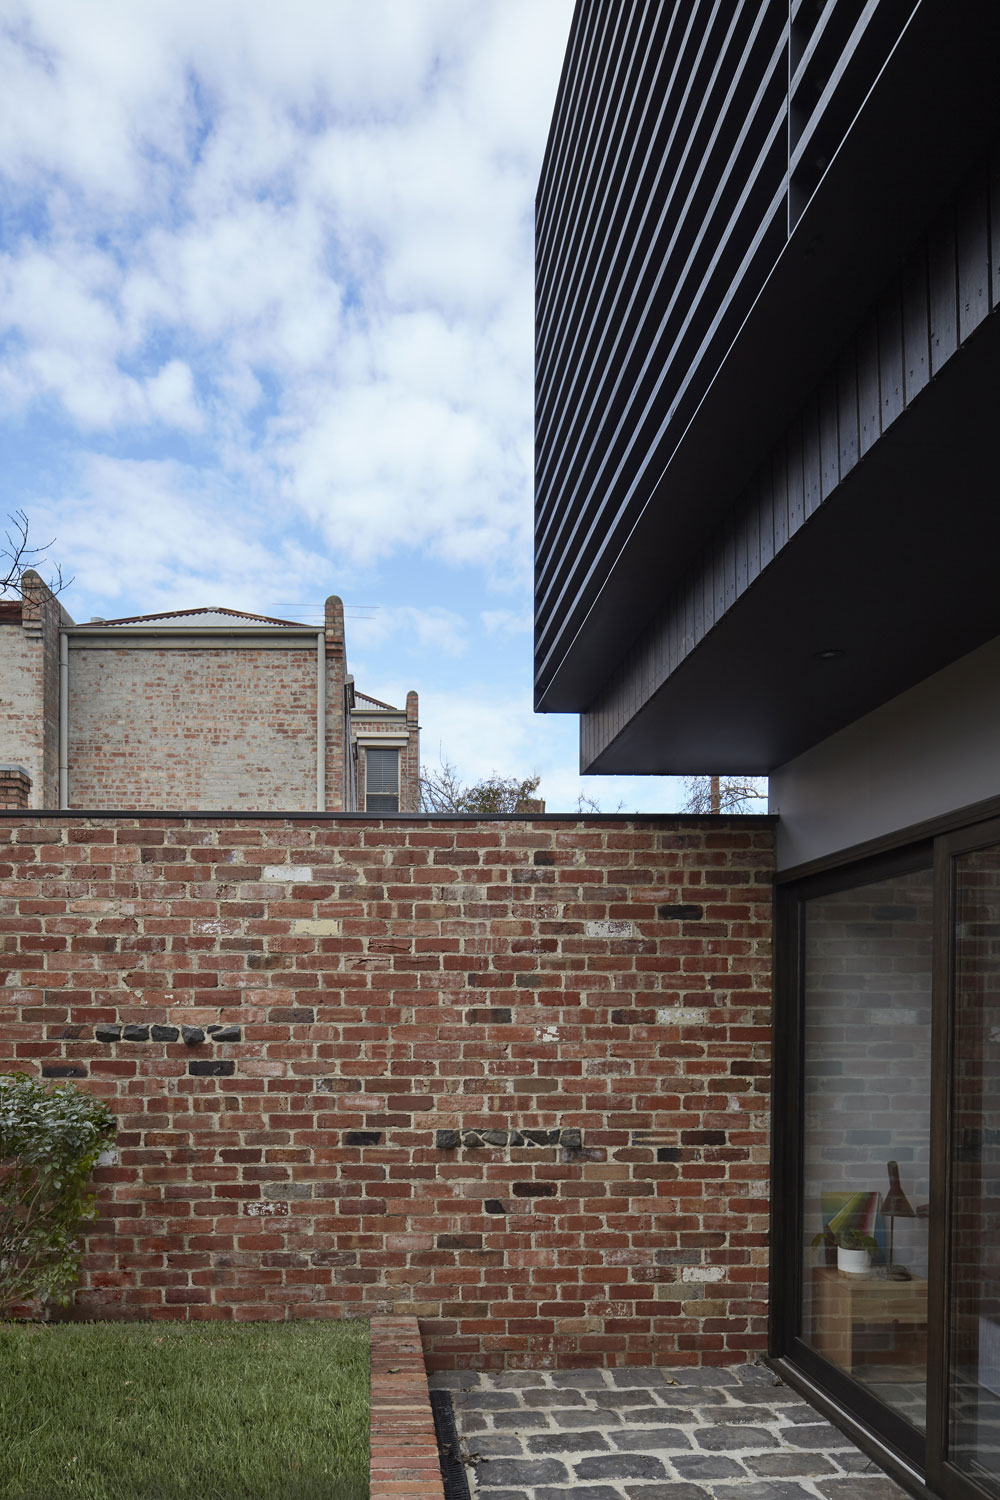 The recycled brick wall extends out from the house enclosing the garden from the laneway.